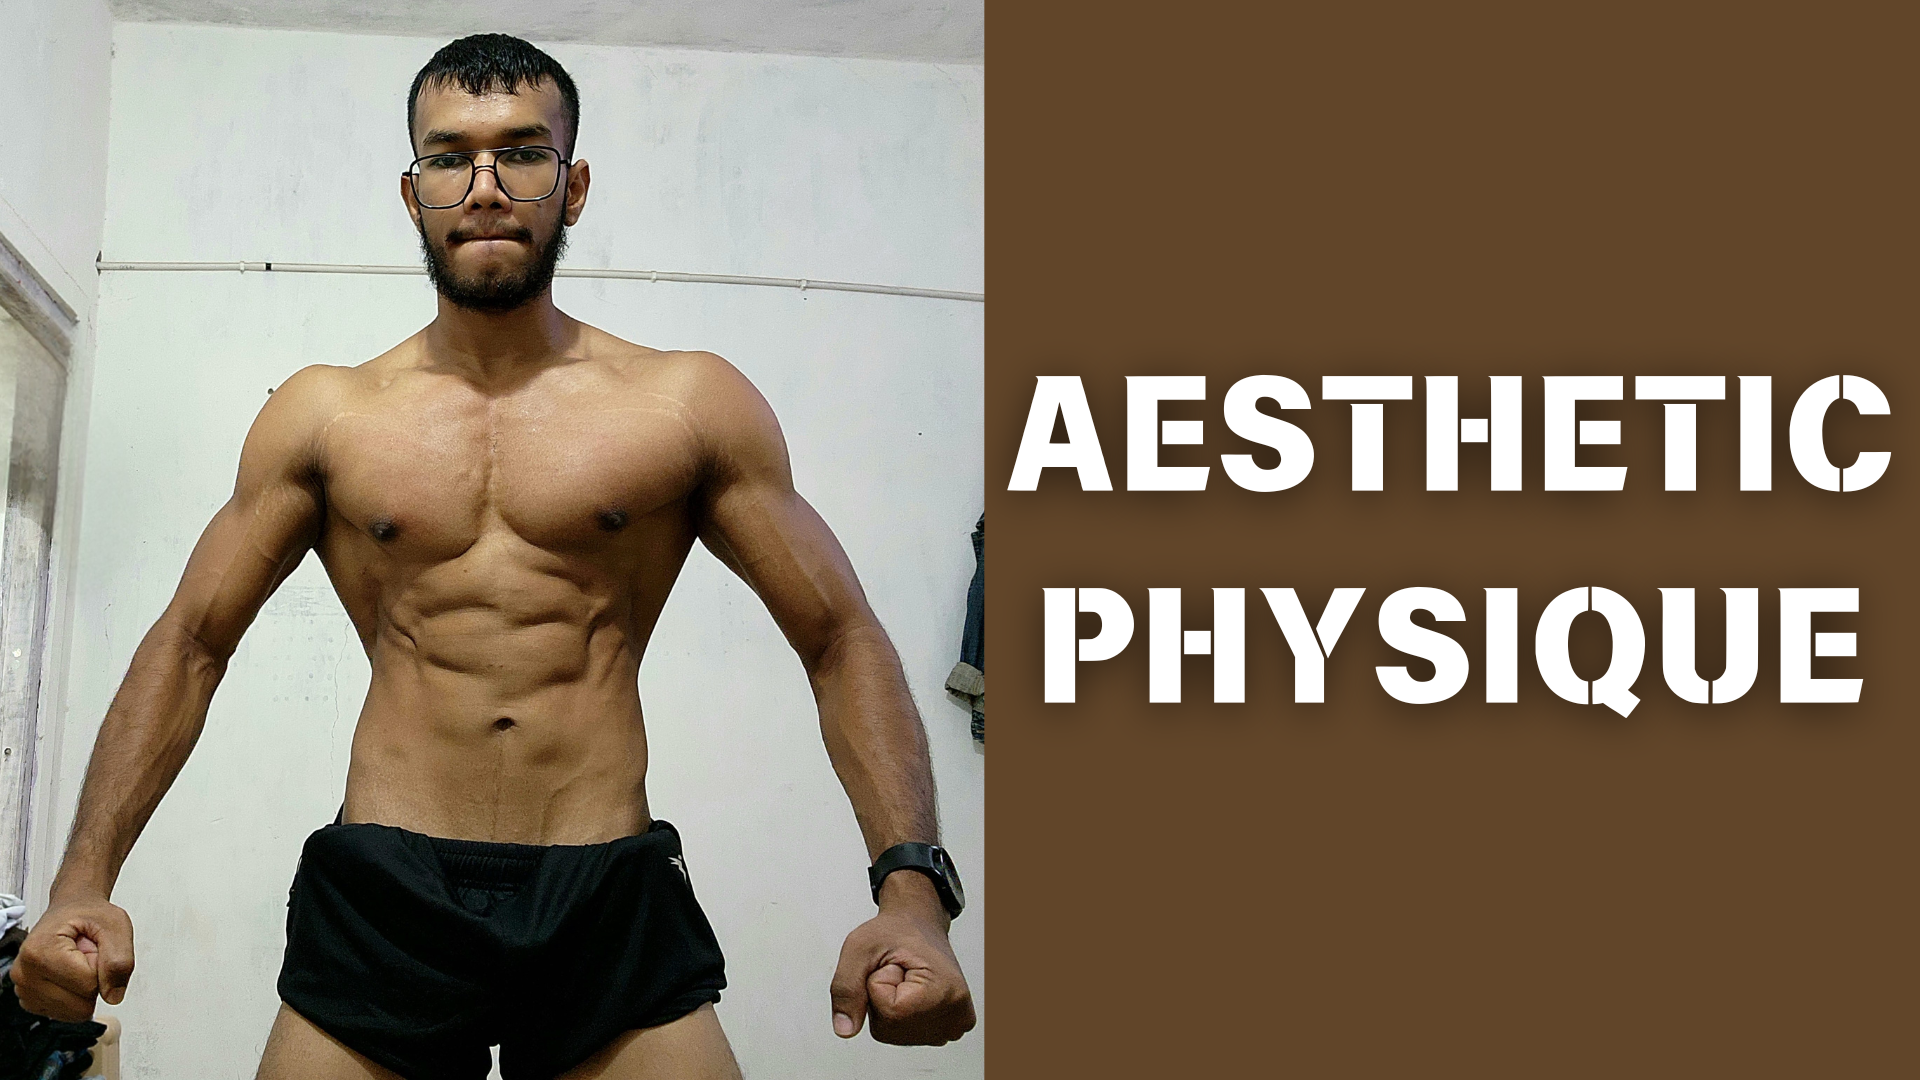 You are currently viewing How To Build An Aesthetic Physique [Without Going to The Gym] Easy Guide